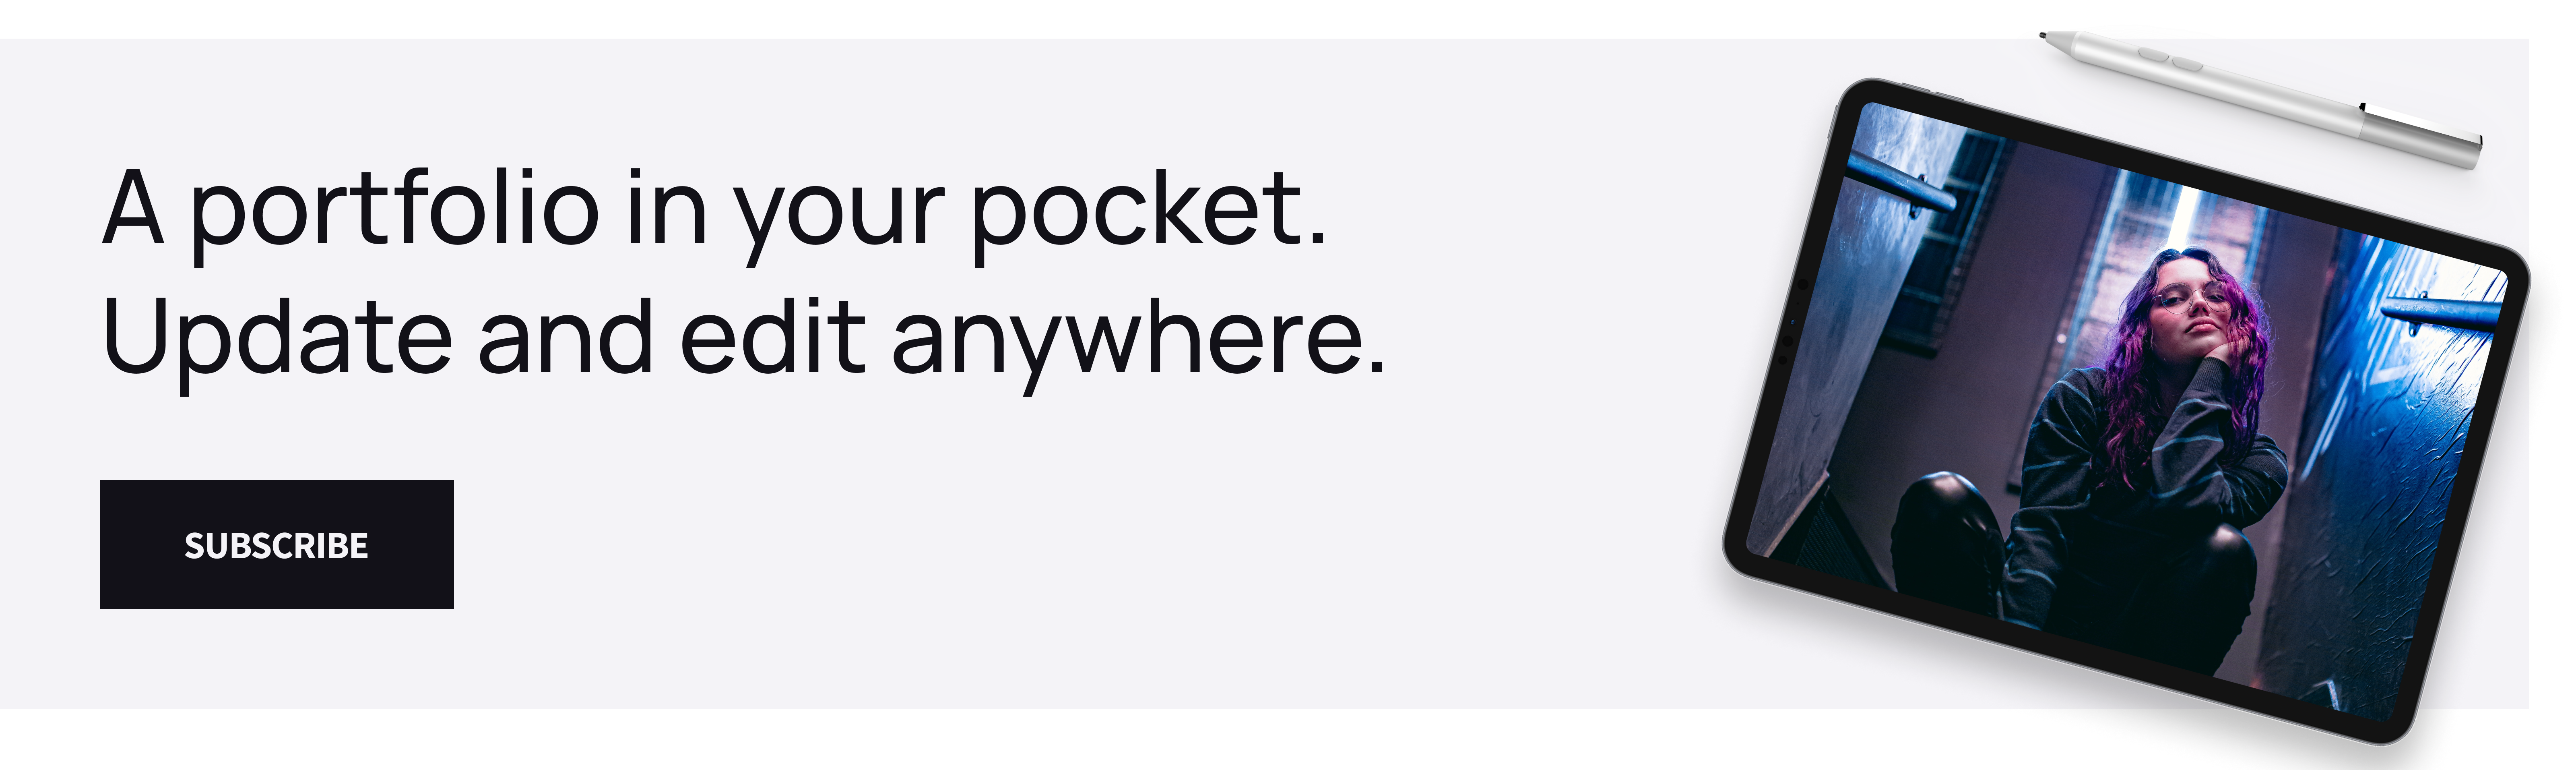 A banner saying "a portfolio in your pocket. Update and edit anywhere."